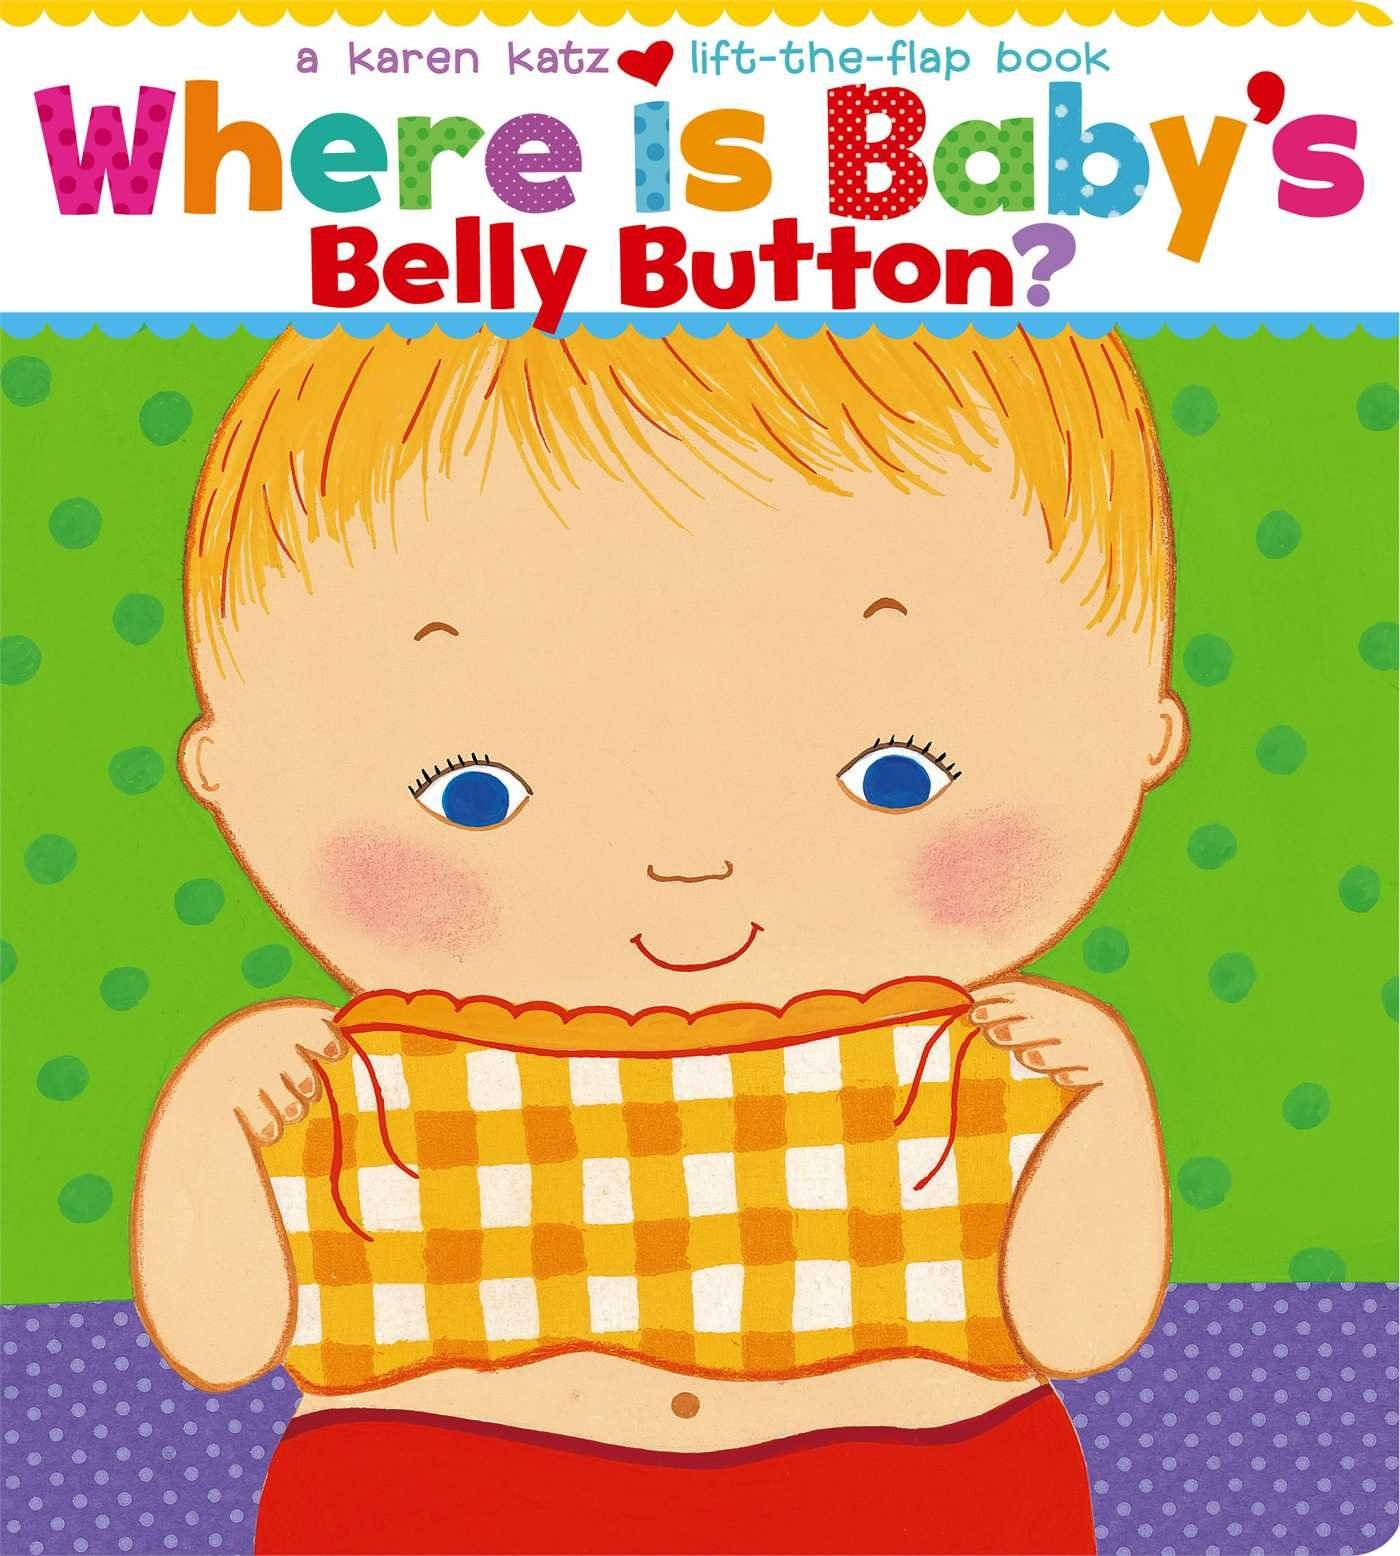 IMG : Where is baby's Belly Button?